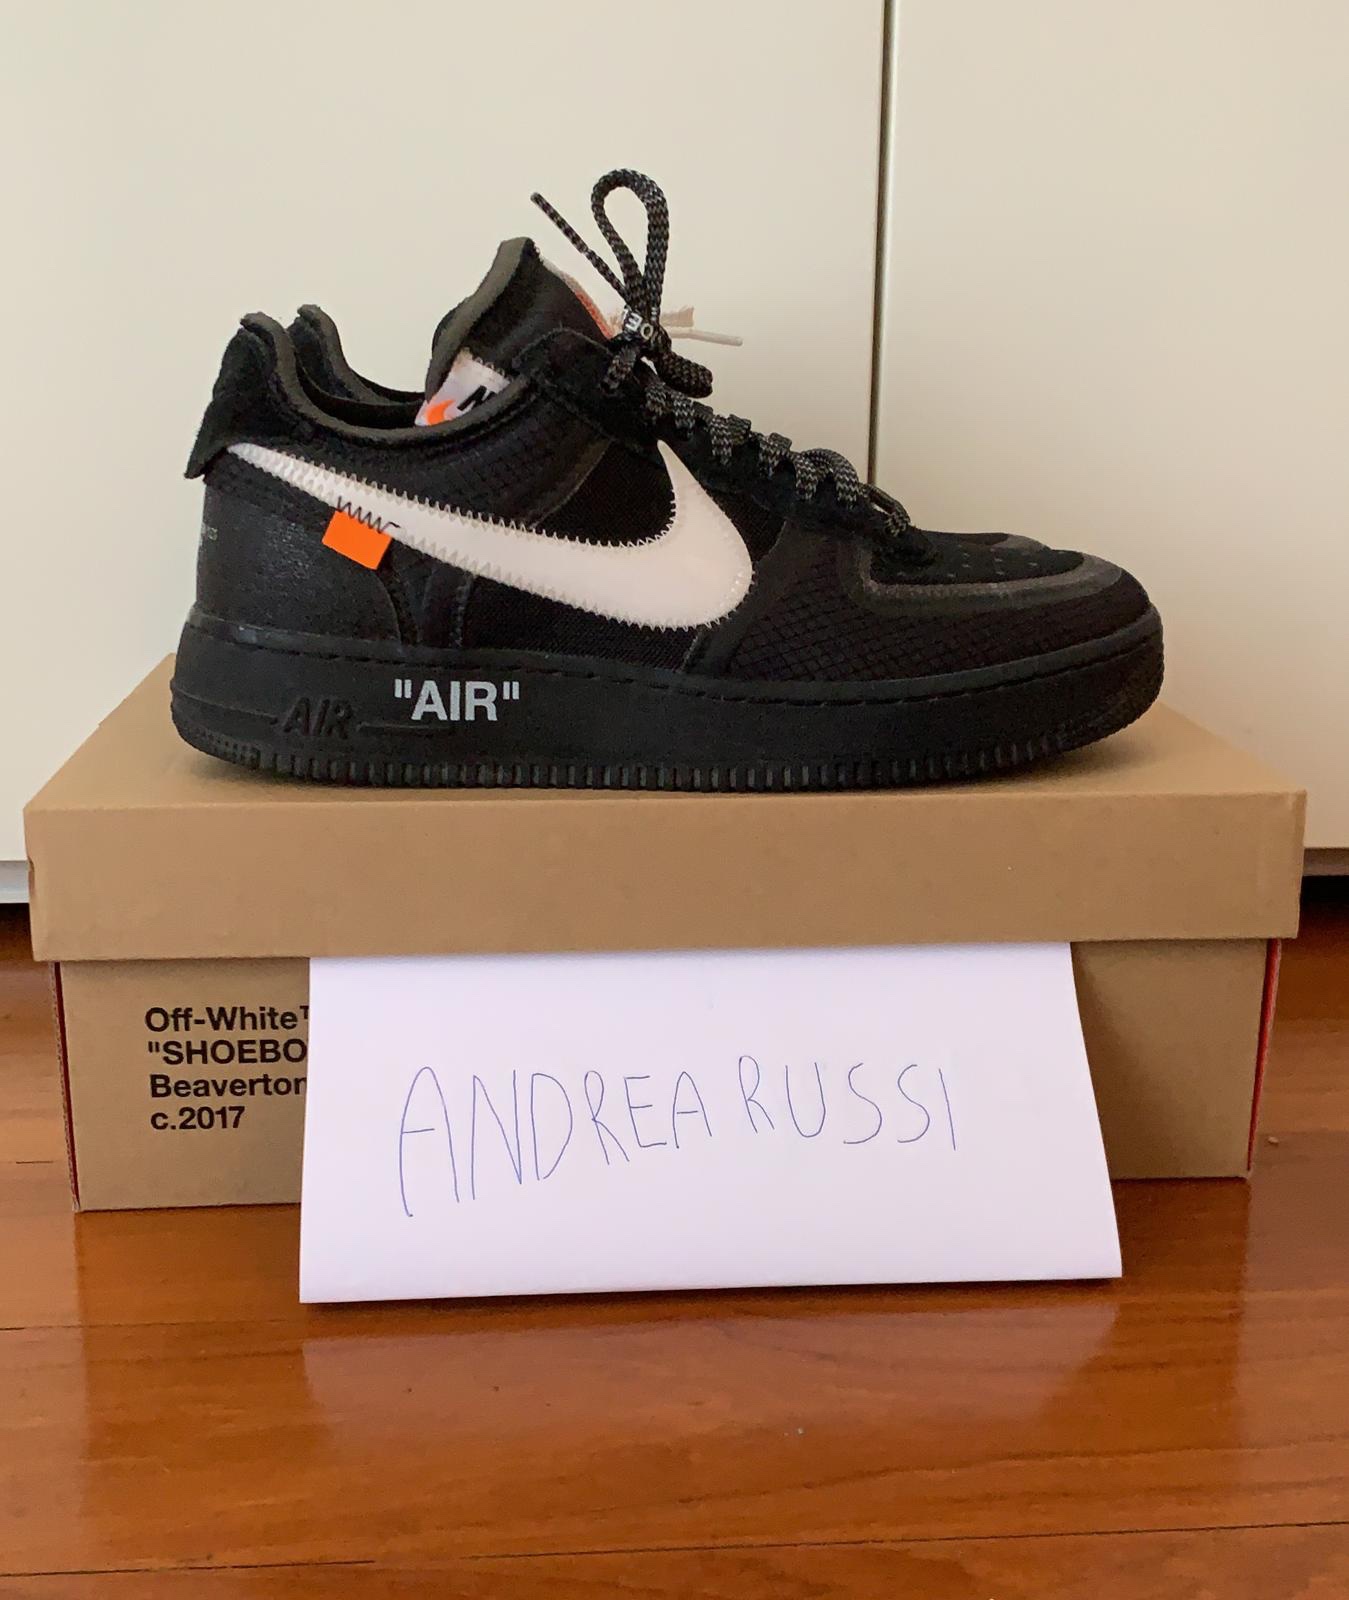 air force 1 off white nere